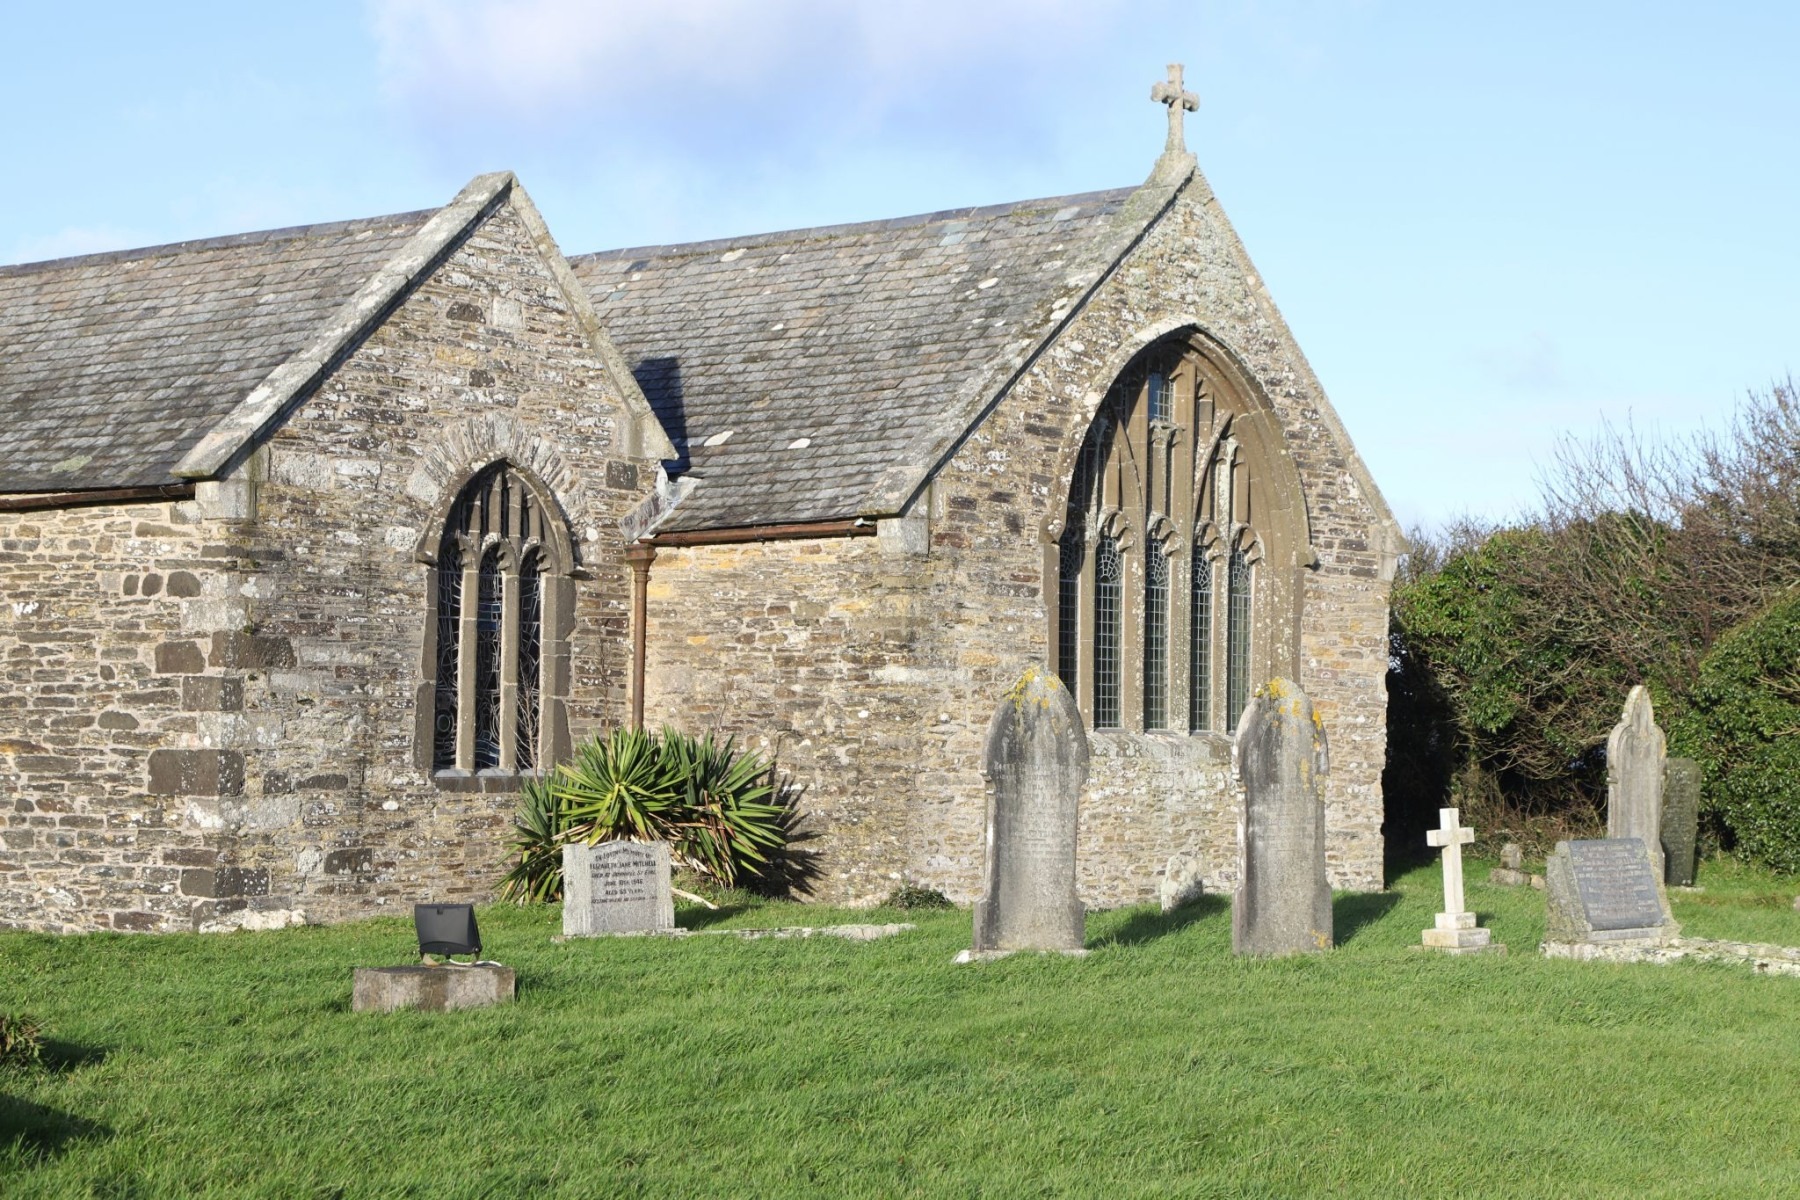 The eastern end of St. Eval Parish Church near Newquay in Cornwall